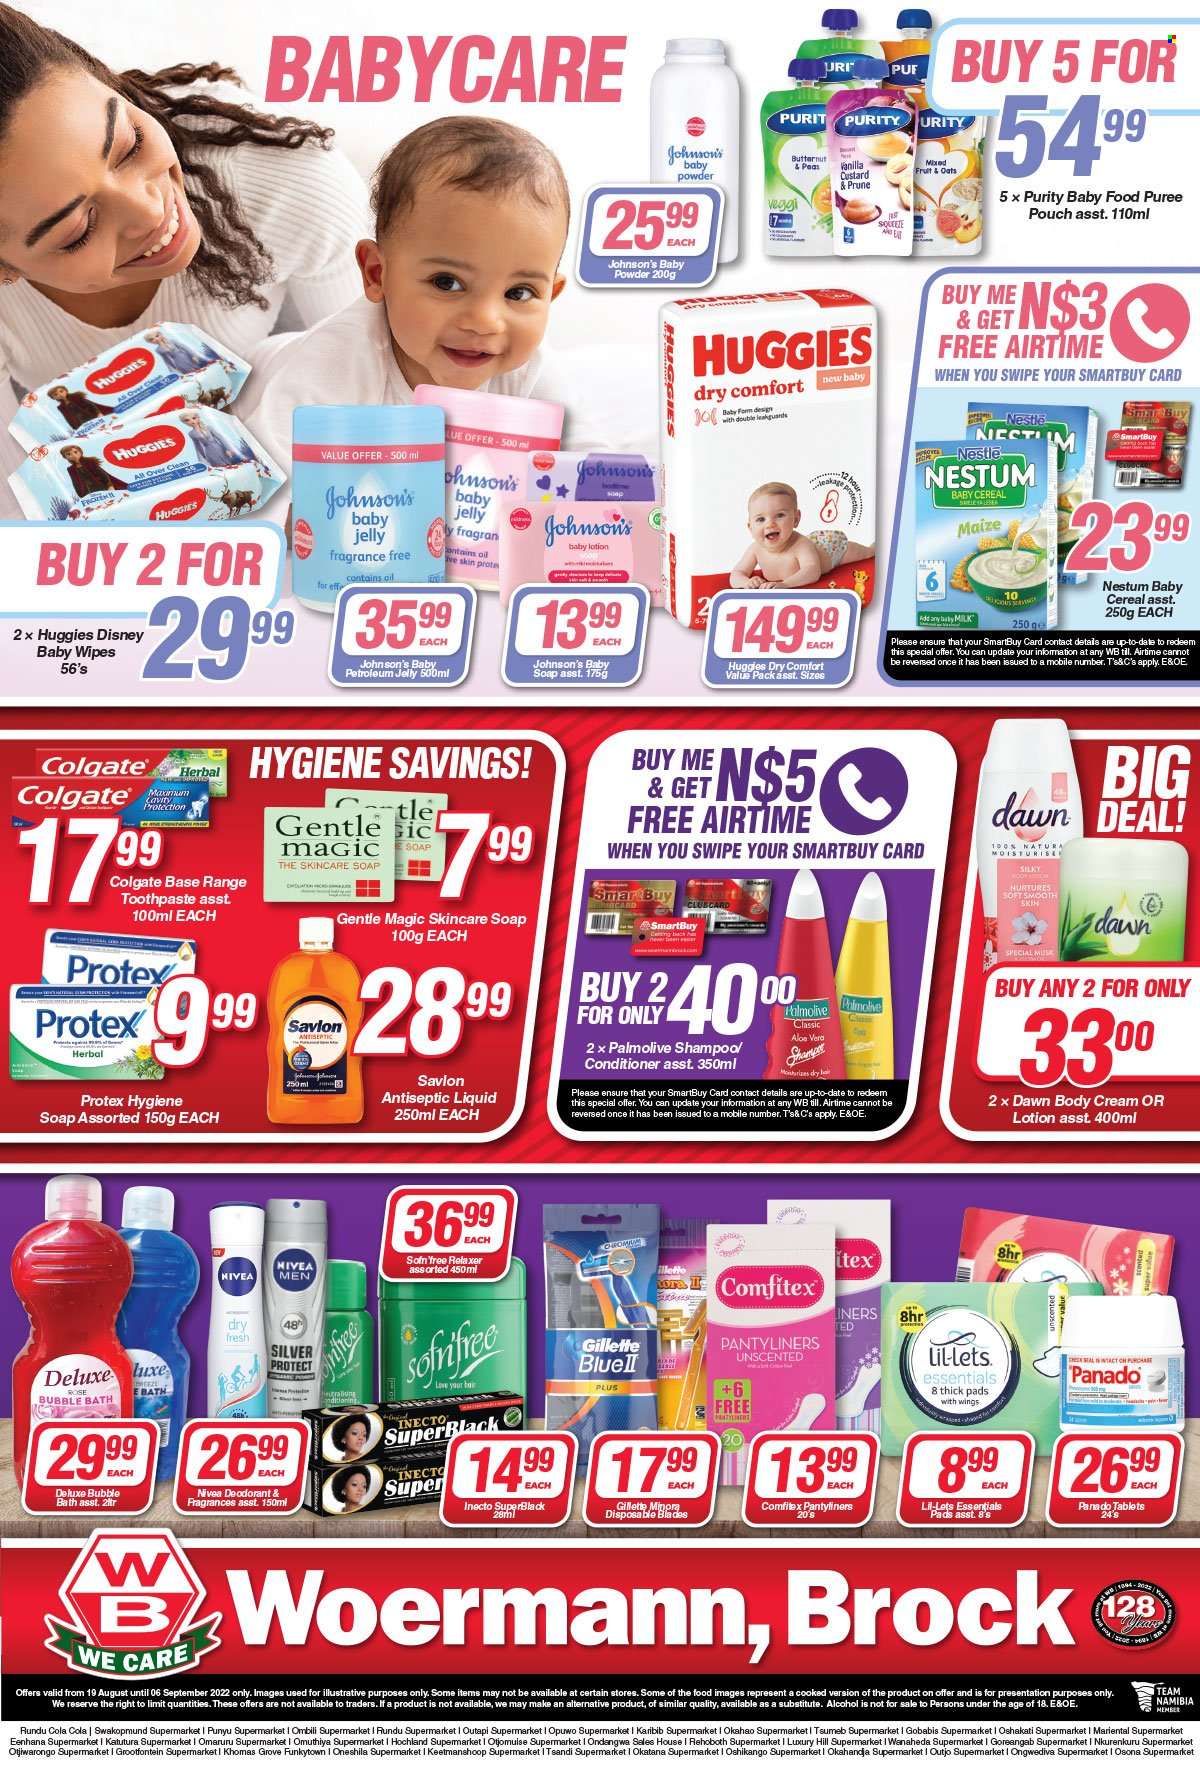 Woermann Brock catalogue  - 19/08/2022 - 06/09/2022 - Sales products - custard, Disney, milk, Nestlé, cereals, oil, alcohol, Purity, wipes, Huggies, baby wipes, Johnson's, bubble bath, shampoo, Nivea, Palmolive, Protex, soap, Colgate, toothpaste, pantyliners, Lil-lets, petroleum jelly, Gentle Magic, conditioner, relaxer, body lotion, anti-perspirant, deodorant, Gillette, butternut squash. Page 6.